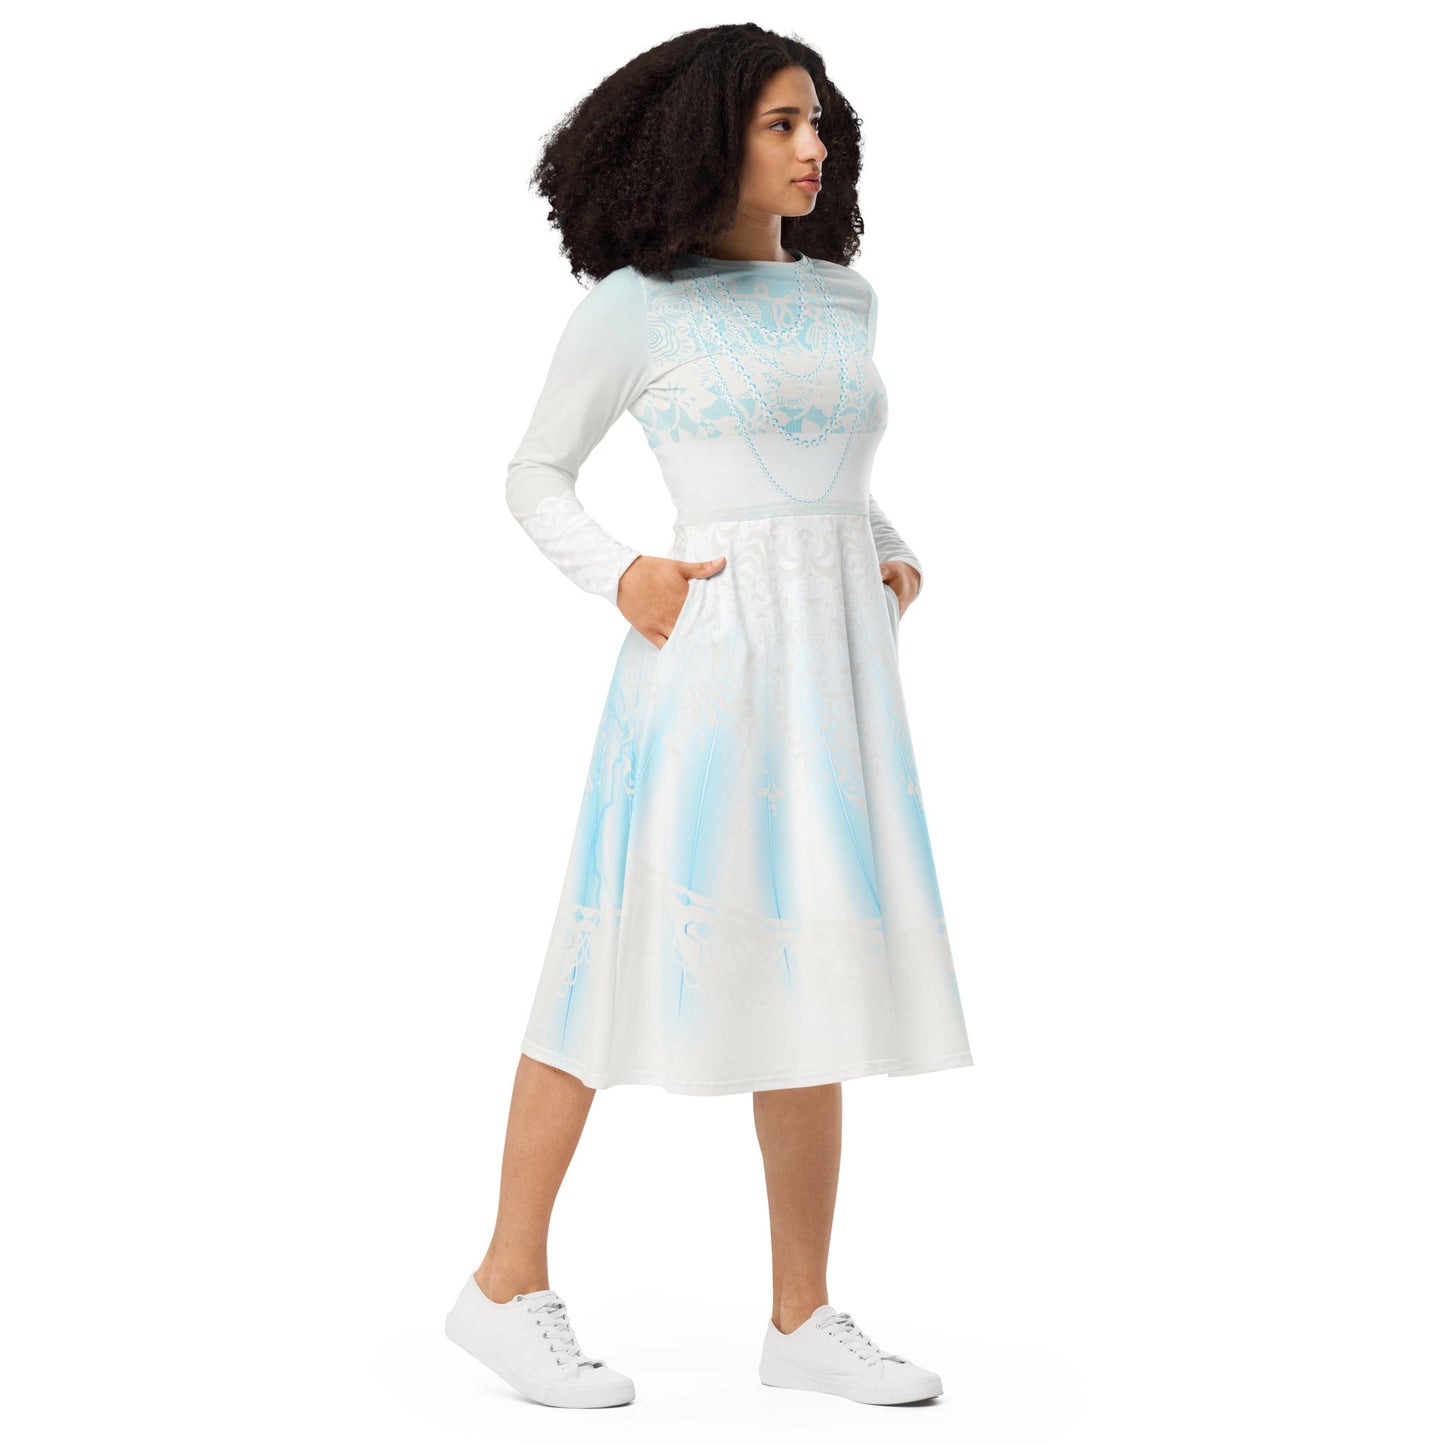 The Constance long sleeve midi dress constance brideconstance costumedisney bounding#tag4##tag5##tag6#